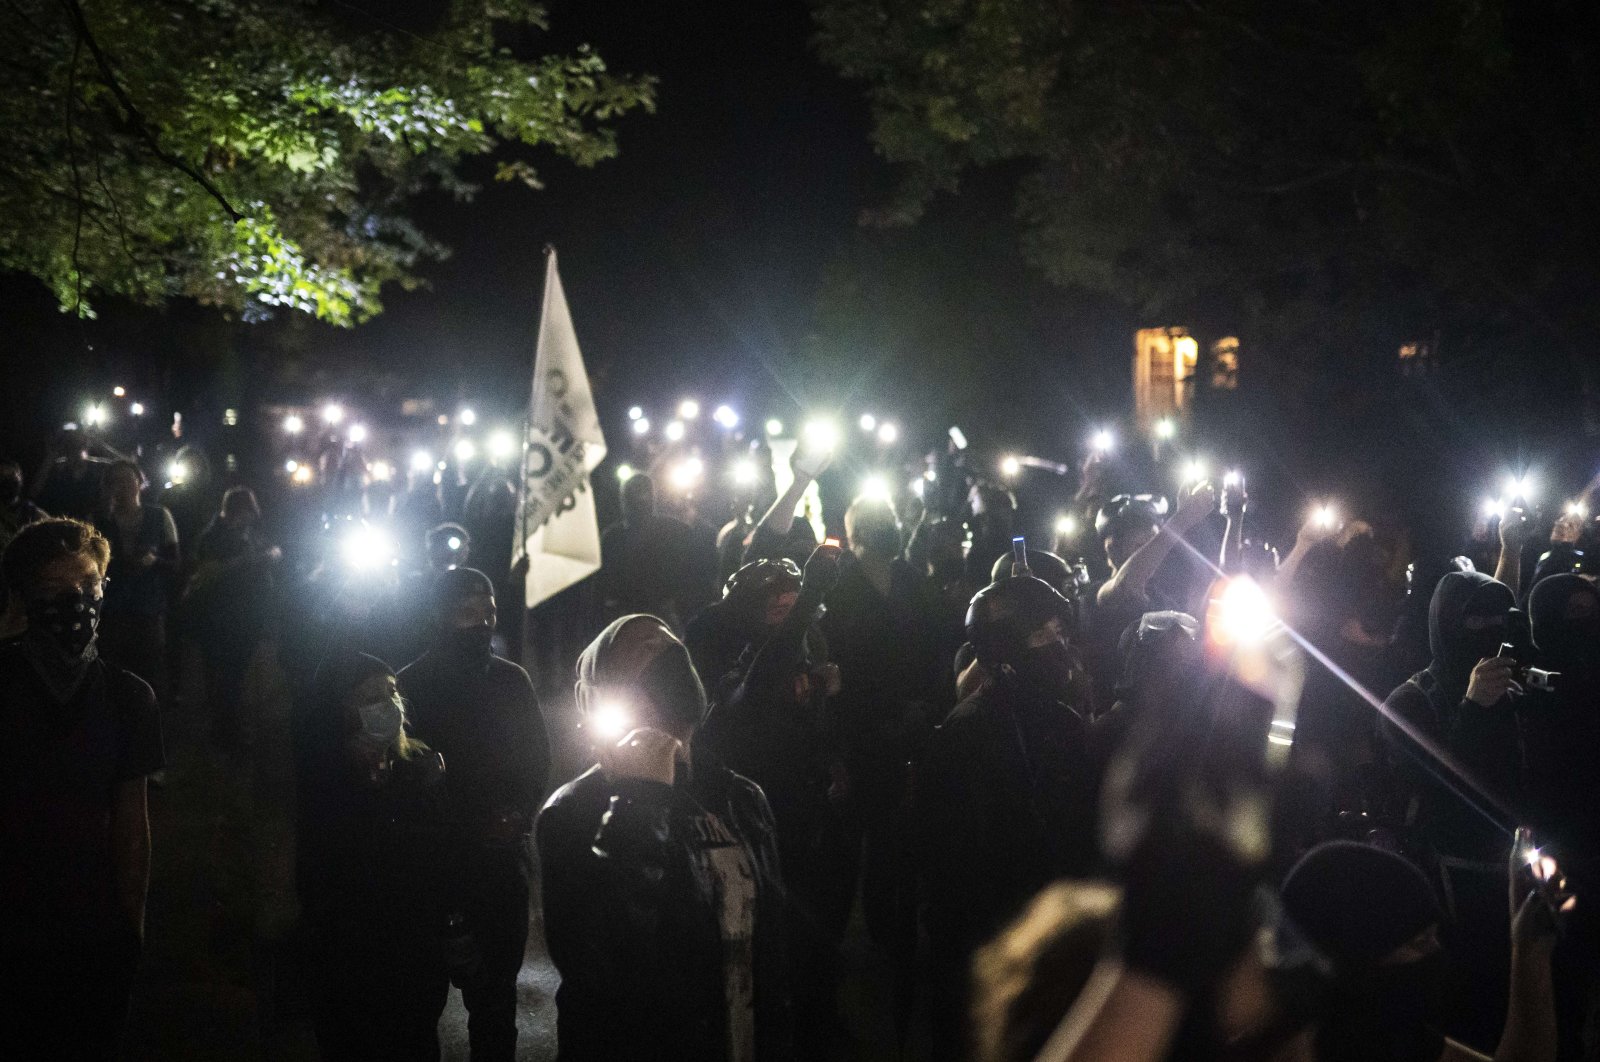 Protesters chant while marching to Kelly Penumbra police building during a protest against racial injustice and police brutality, Portland, Oregon, Oct. 2, 2020. (AFP Photo)